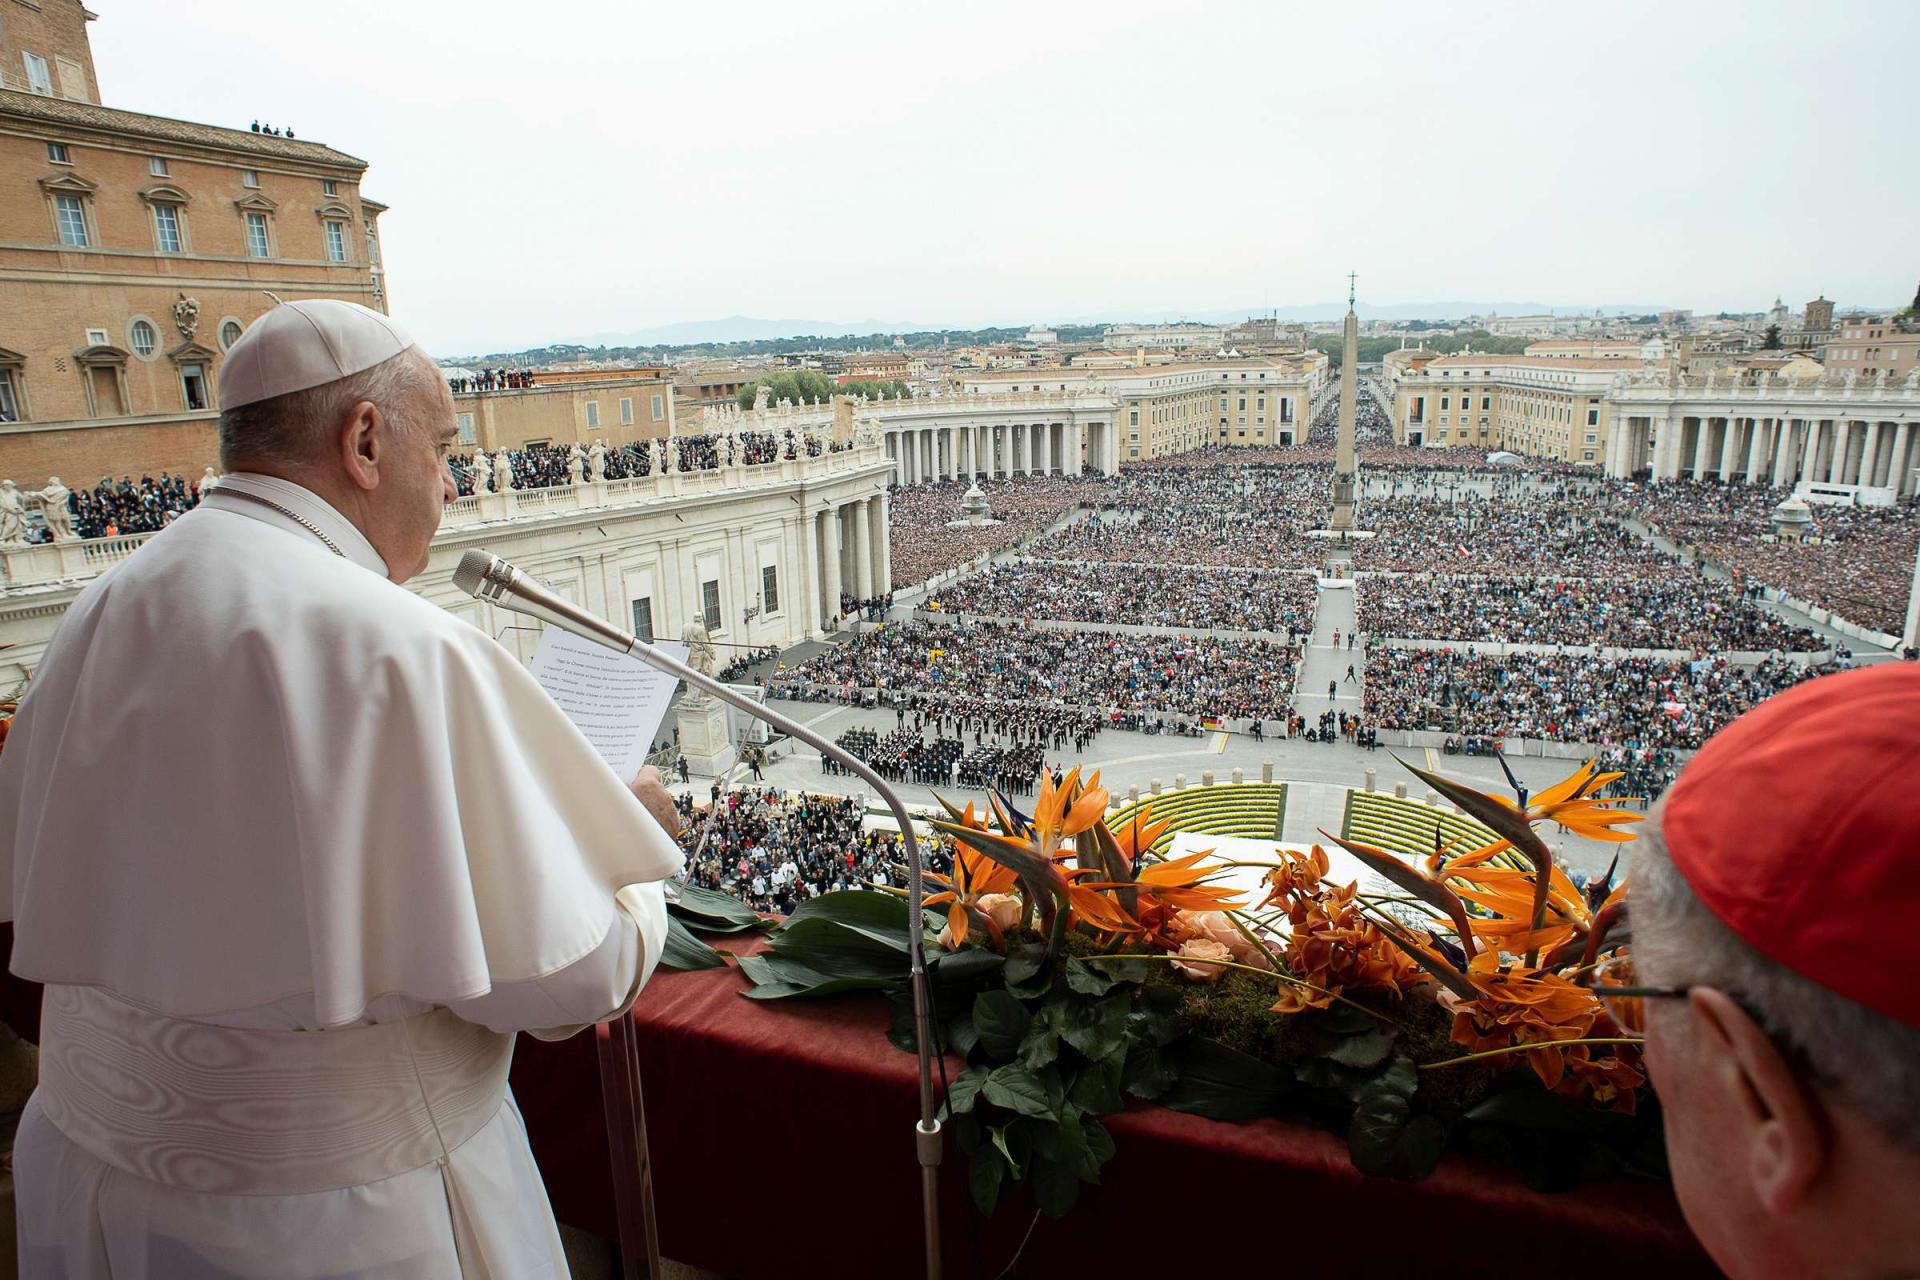 The pope noted how Easter, the holiest Christian festival, "makes us keep our eyes fixed on the Middle East, torn by continuing divisions and tensions."